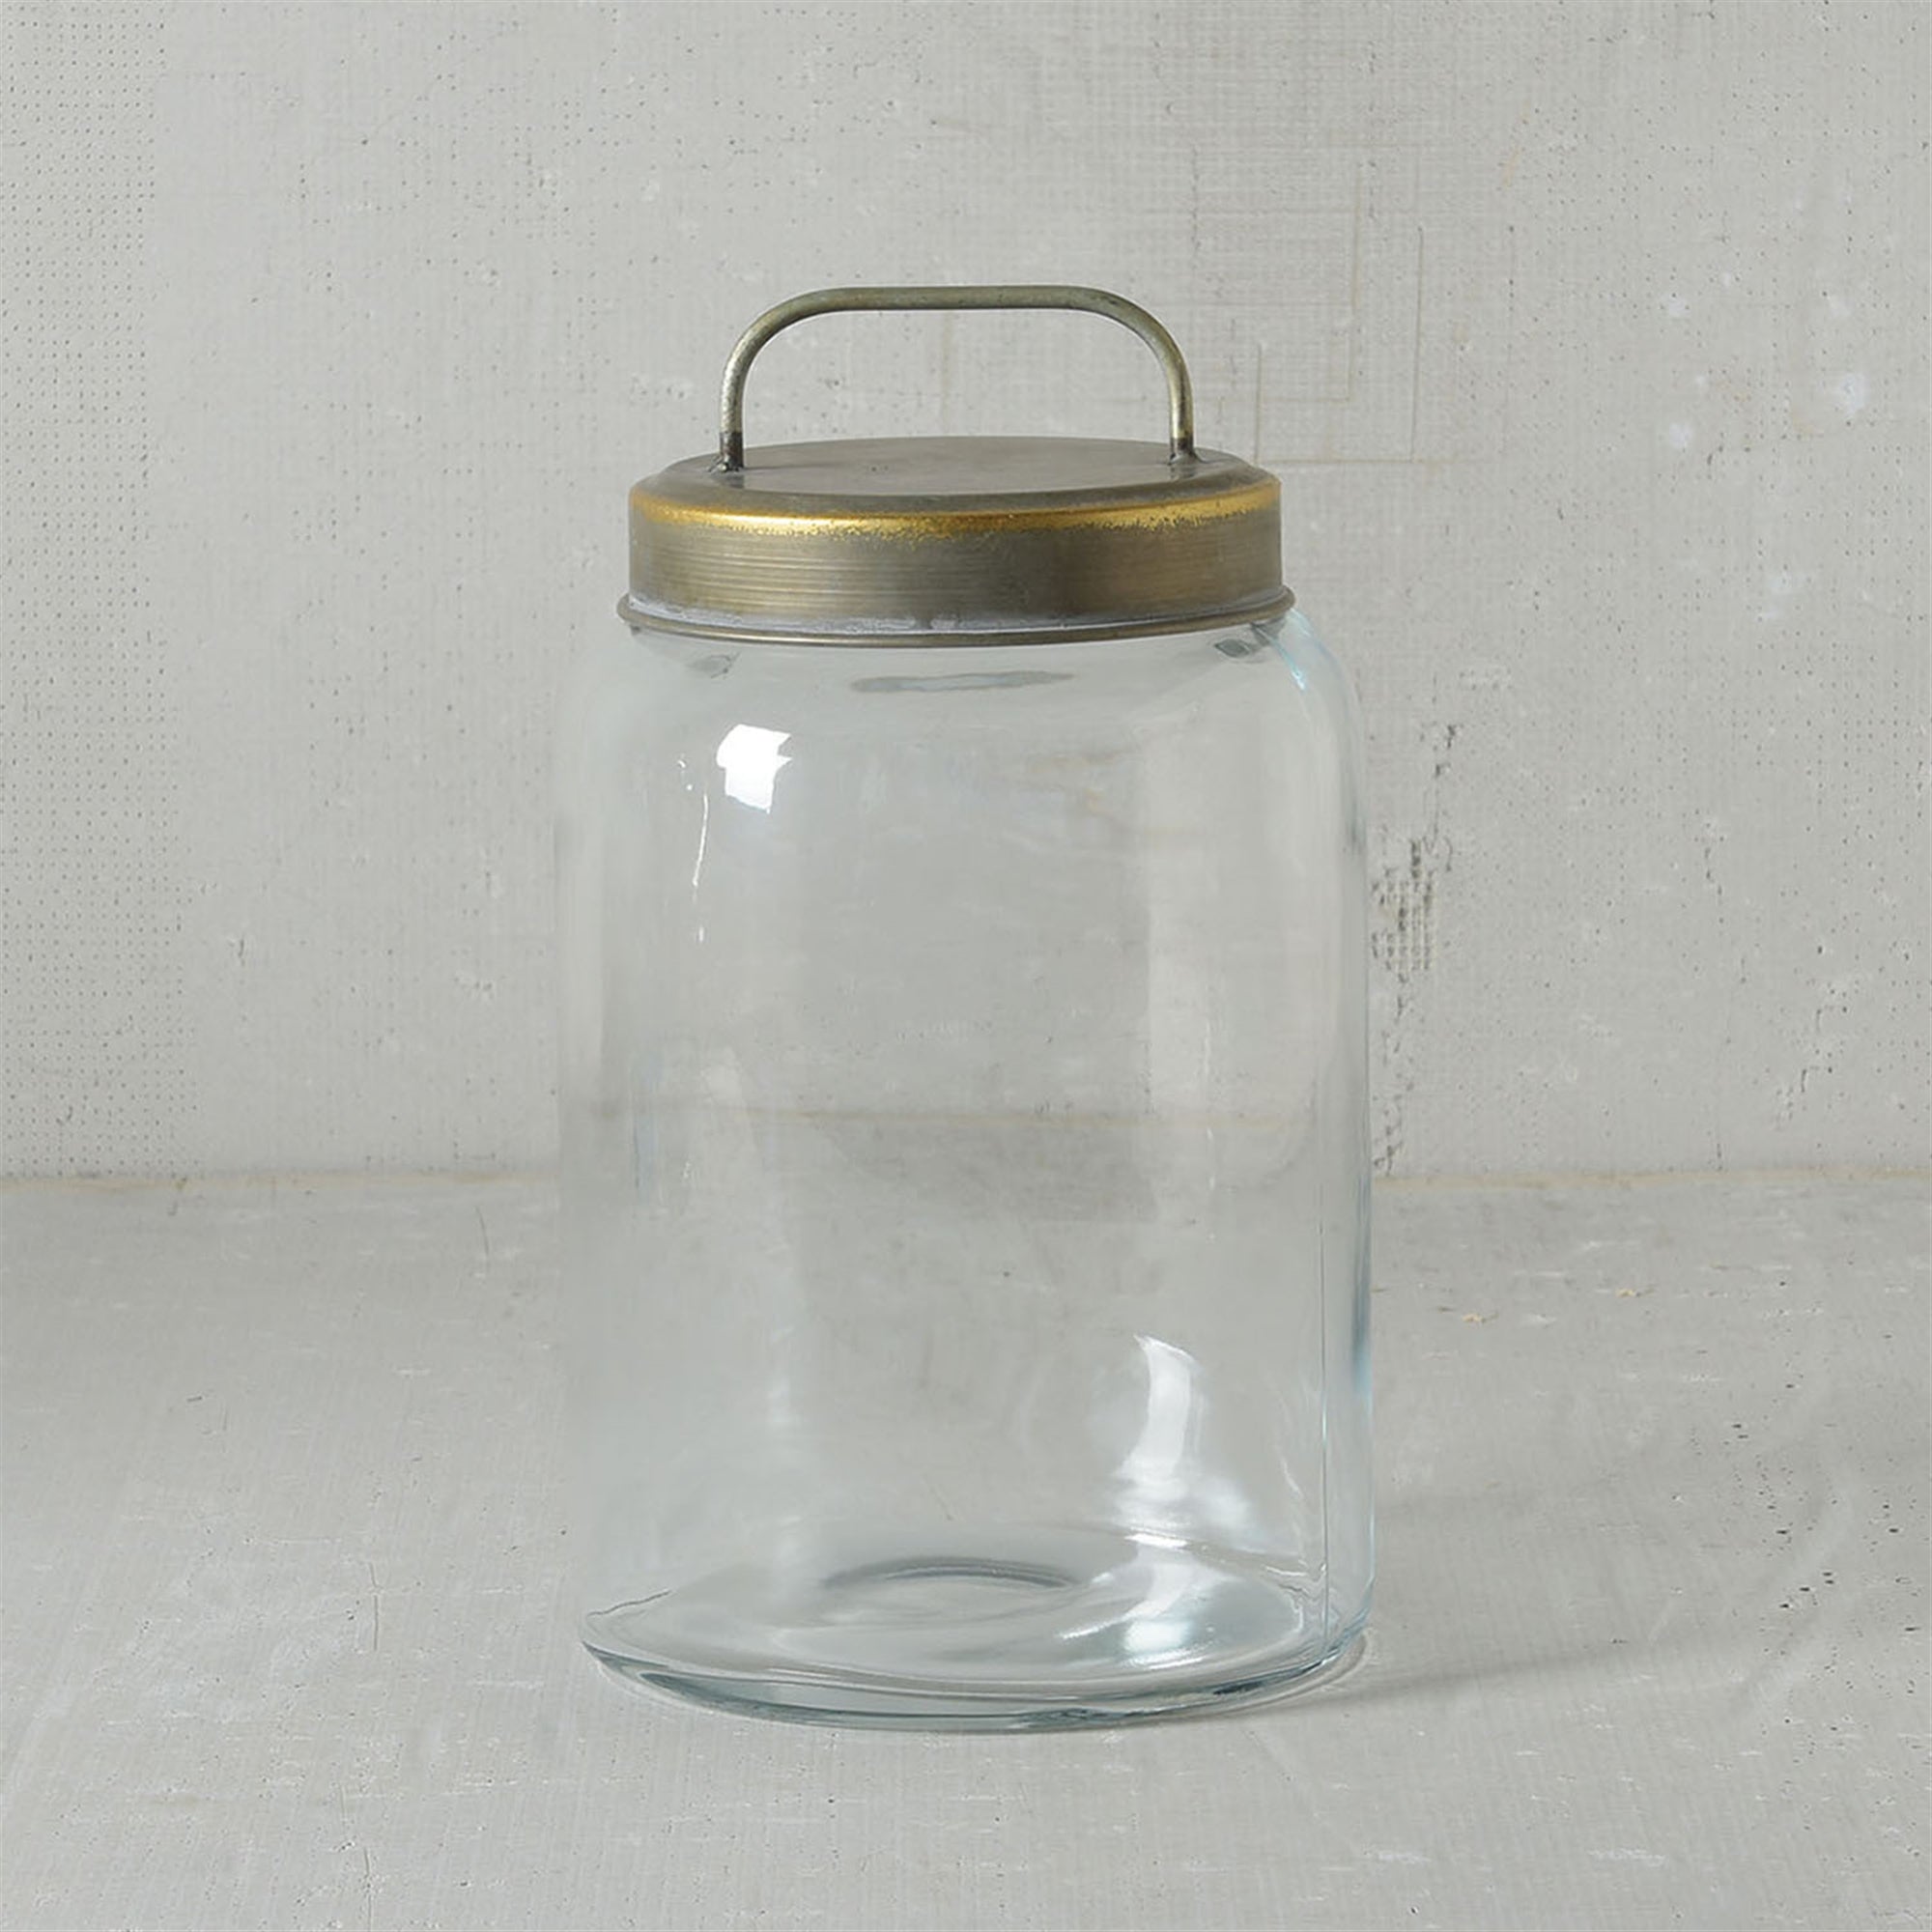 Gentry Canisters